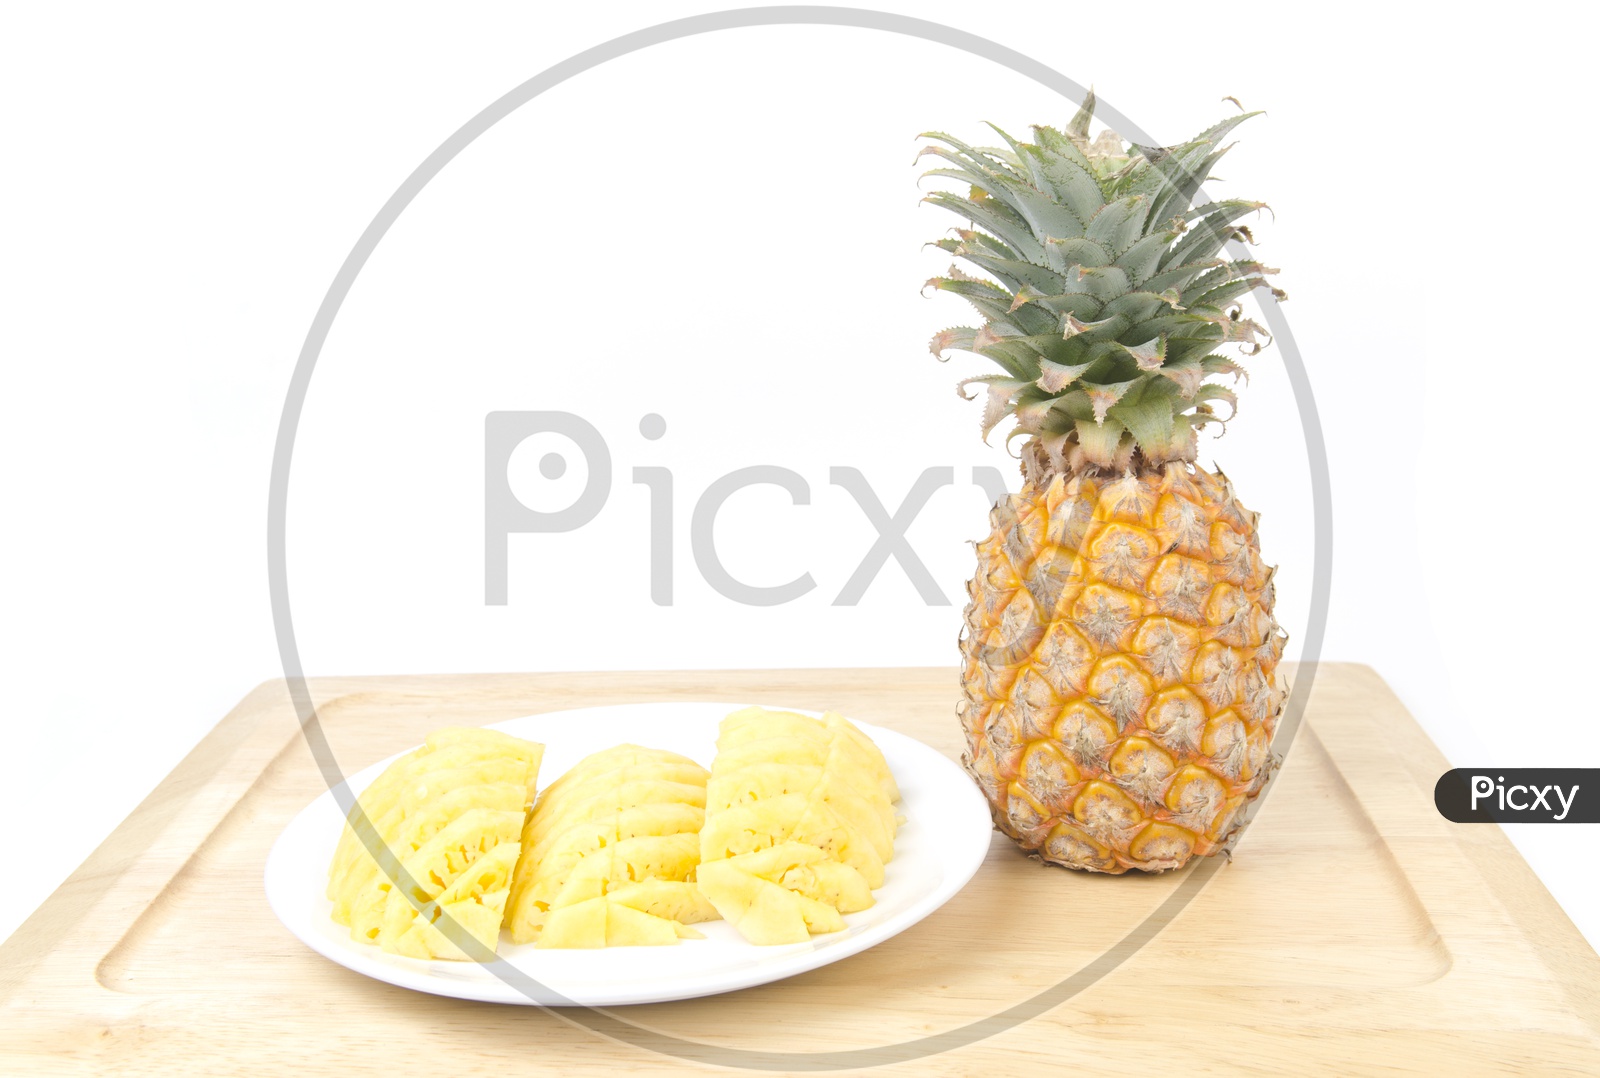 Pineapple Slices in a plate isolated over white background